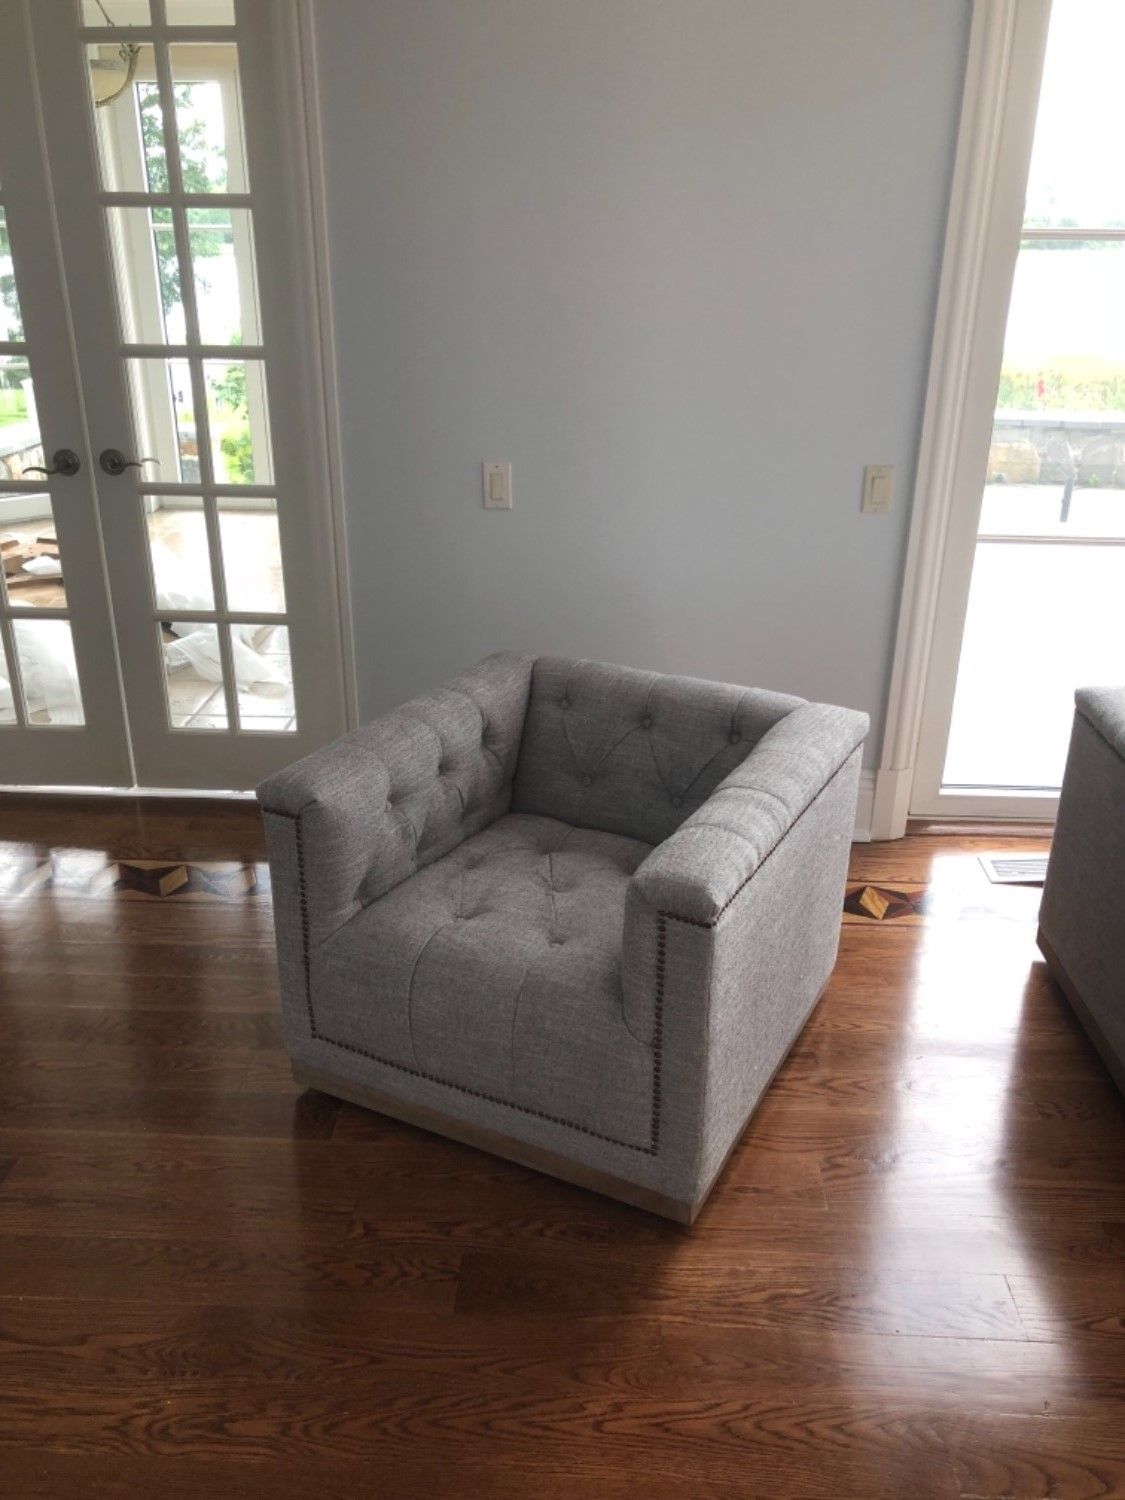 Maxx Grey Fabric Upholstered Tufted Swivel Club Chair | Zin Home Inside Manor Grey Swivel Chairs (View 22 of 25)